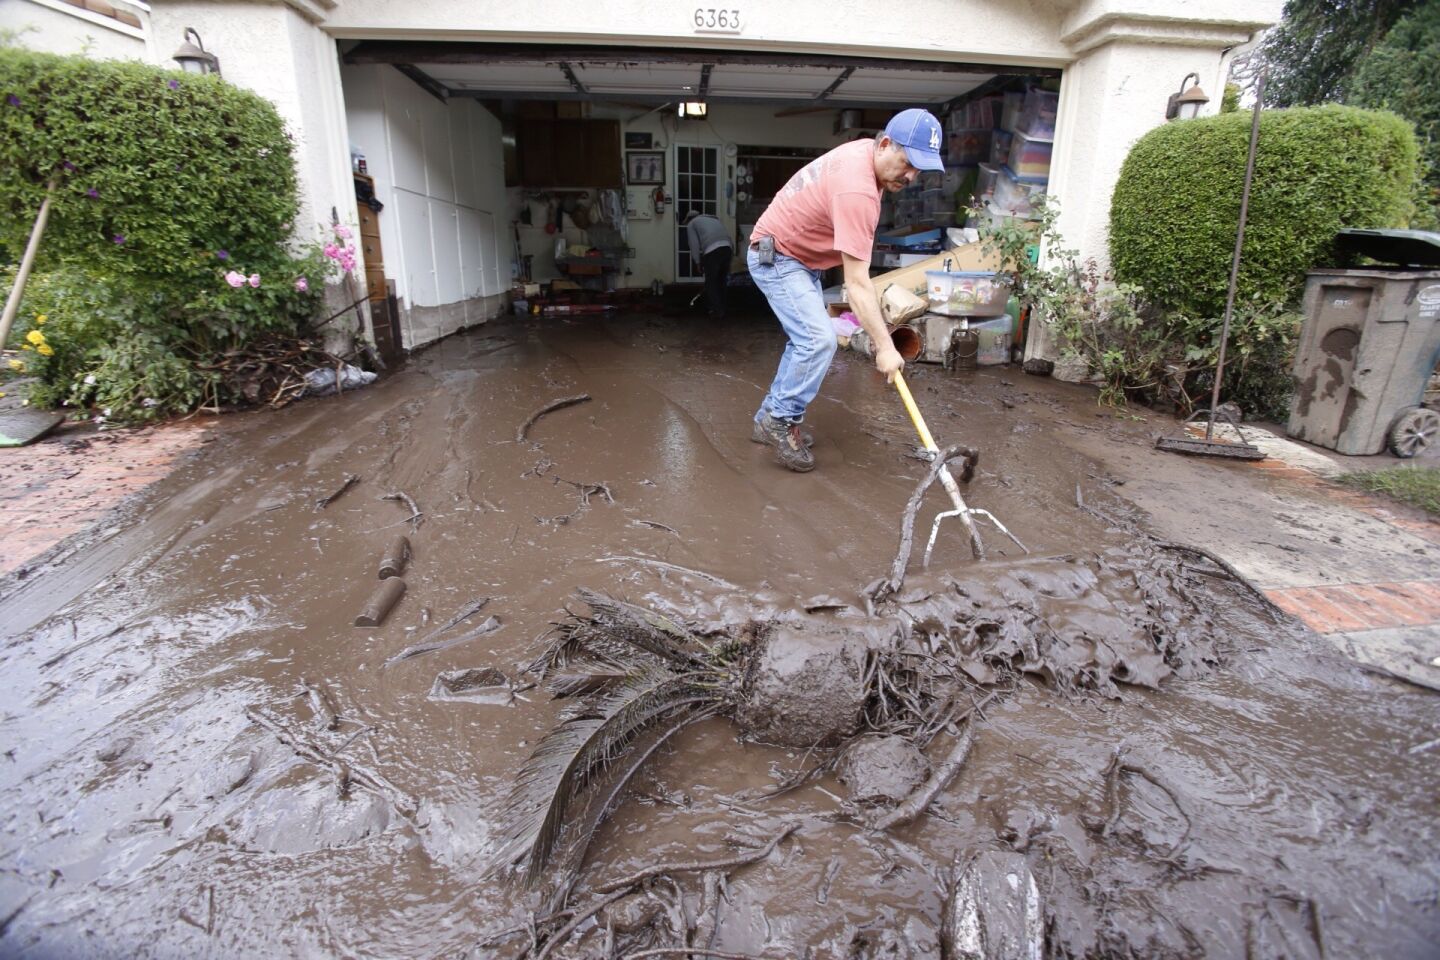 Salvador Medina clears mud from a garage in Camarillo Springs.